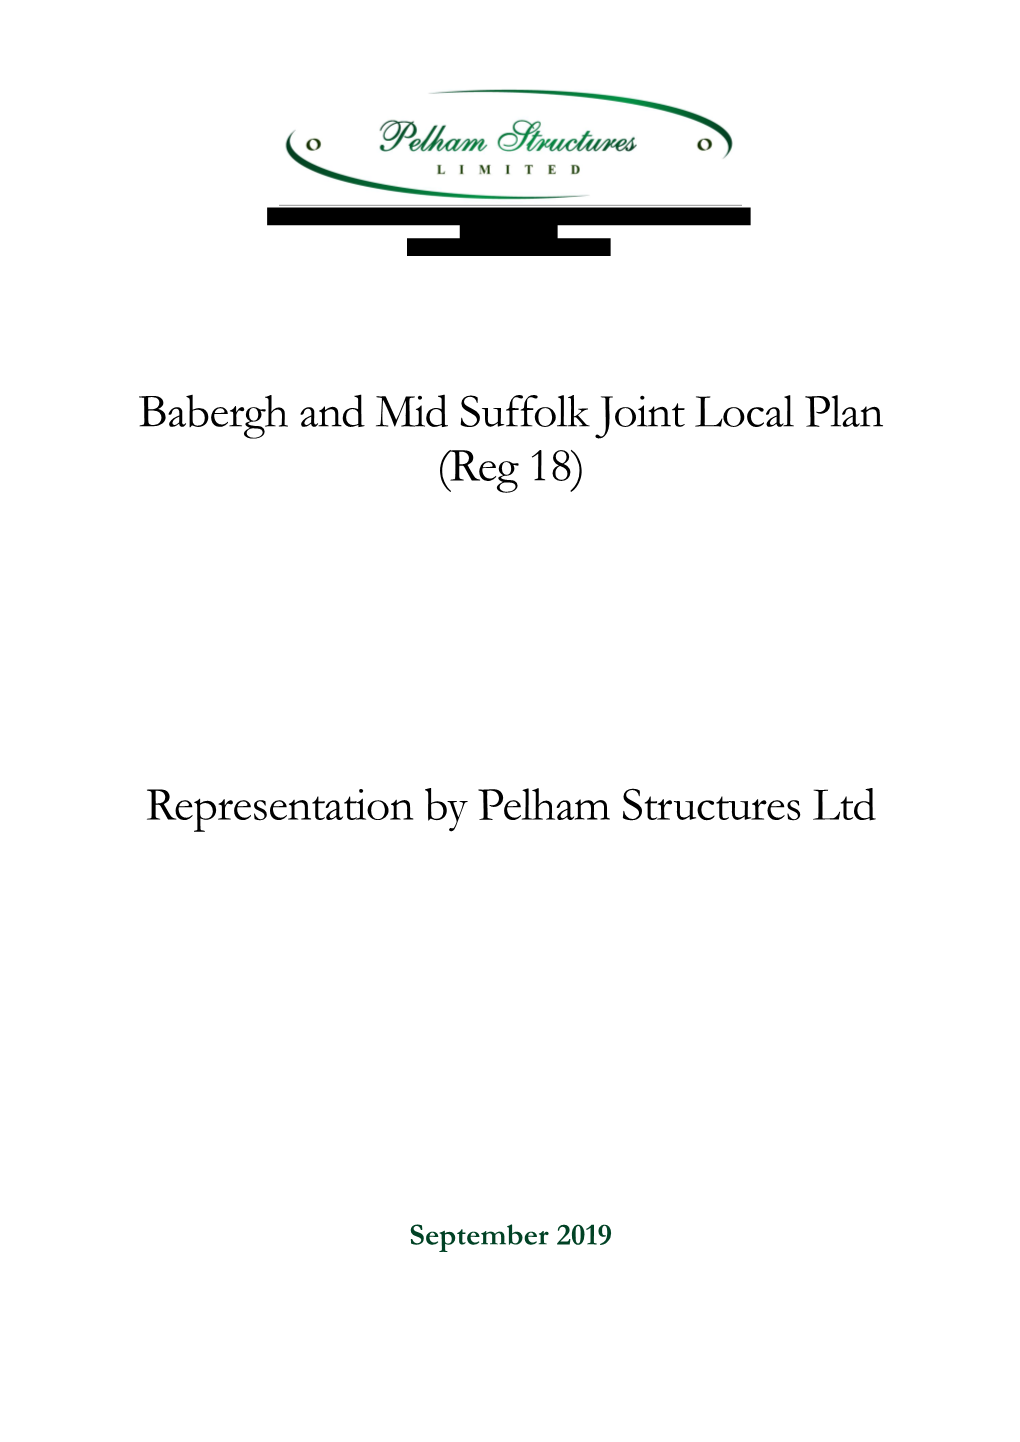 Babergh and Mid Suffolk Joint Local Plan (Reg 18) Representation By